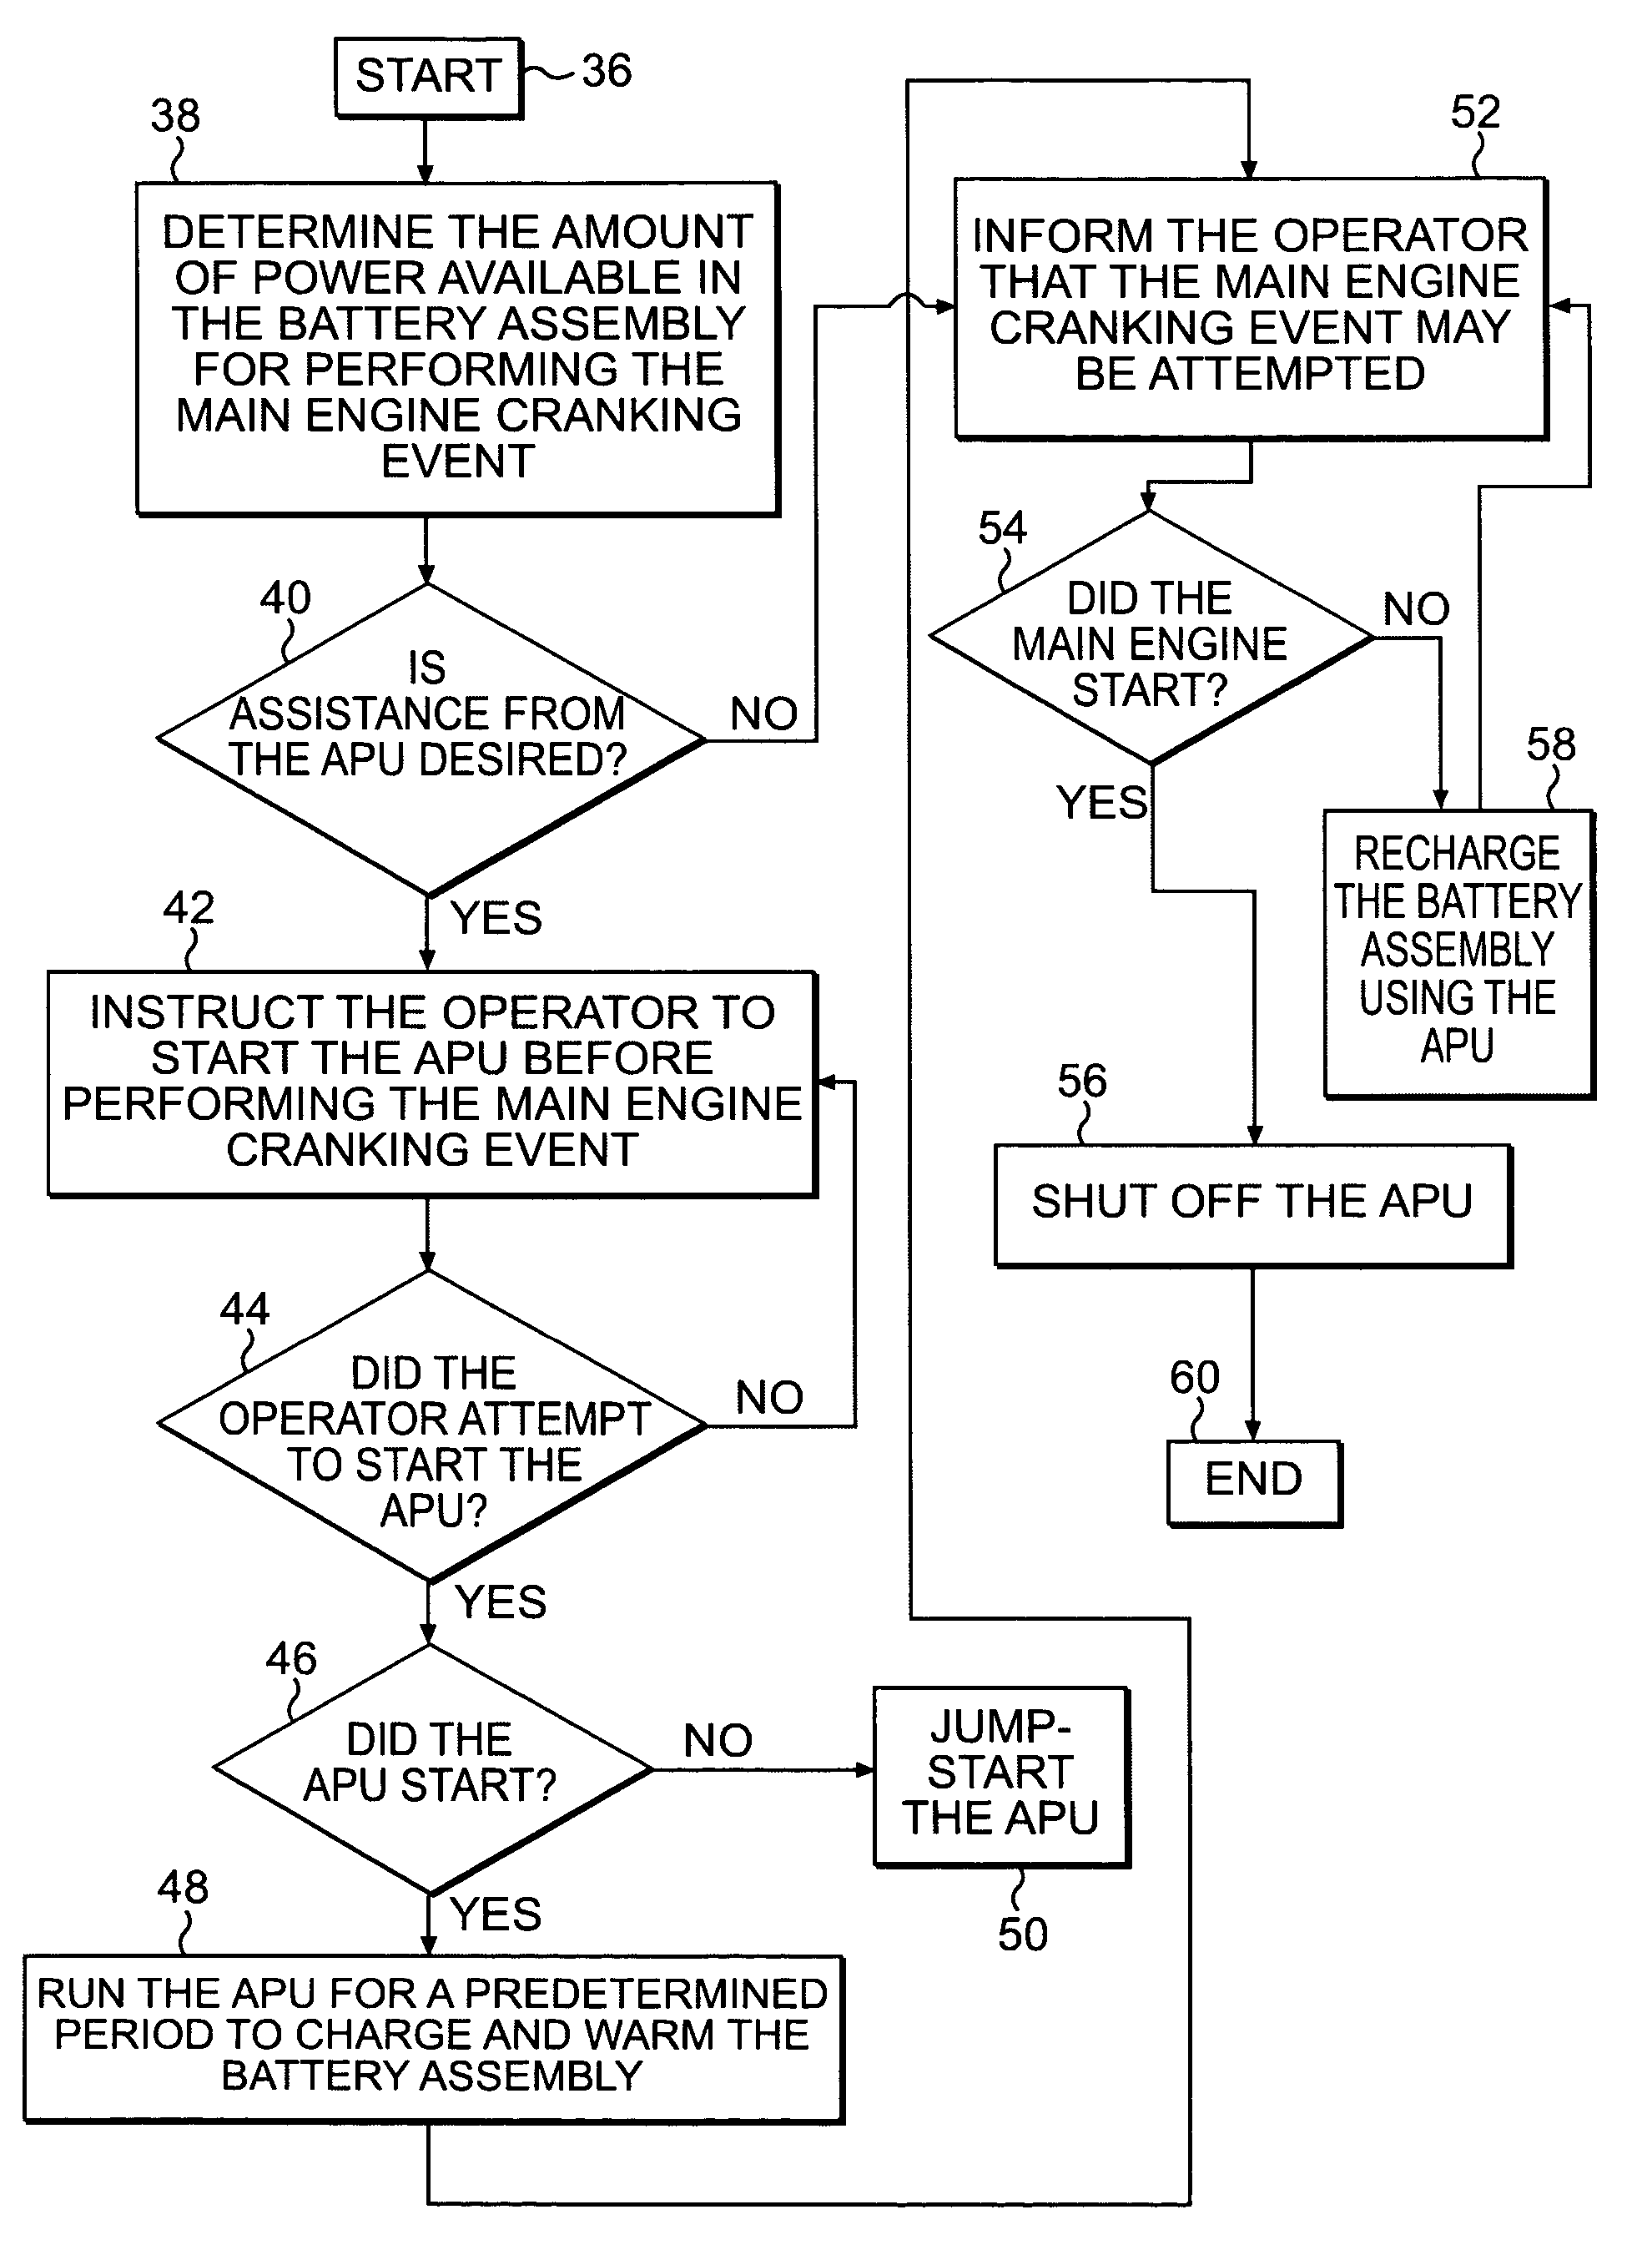 System for assisting a main engine start-up